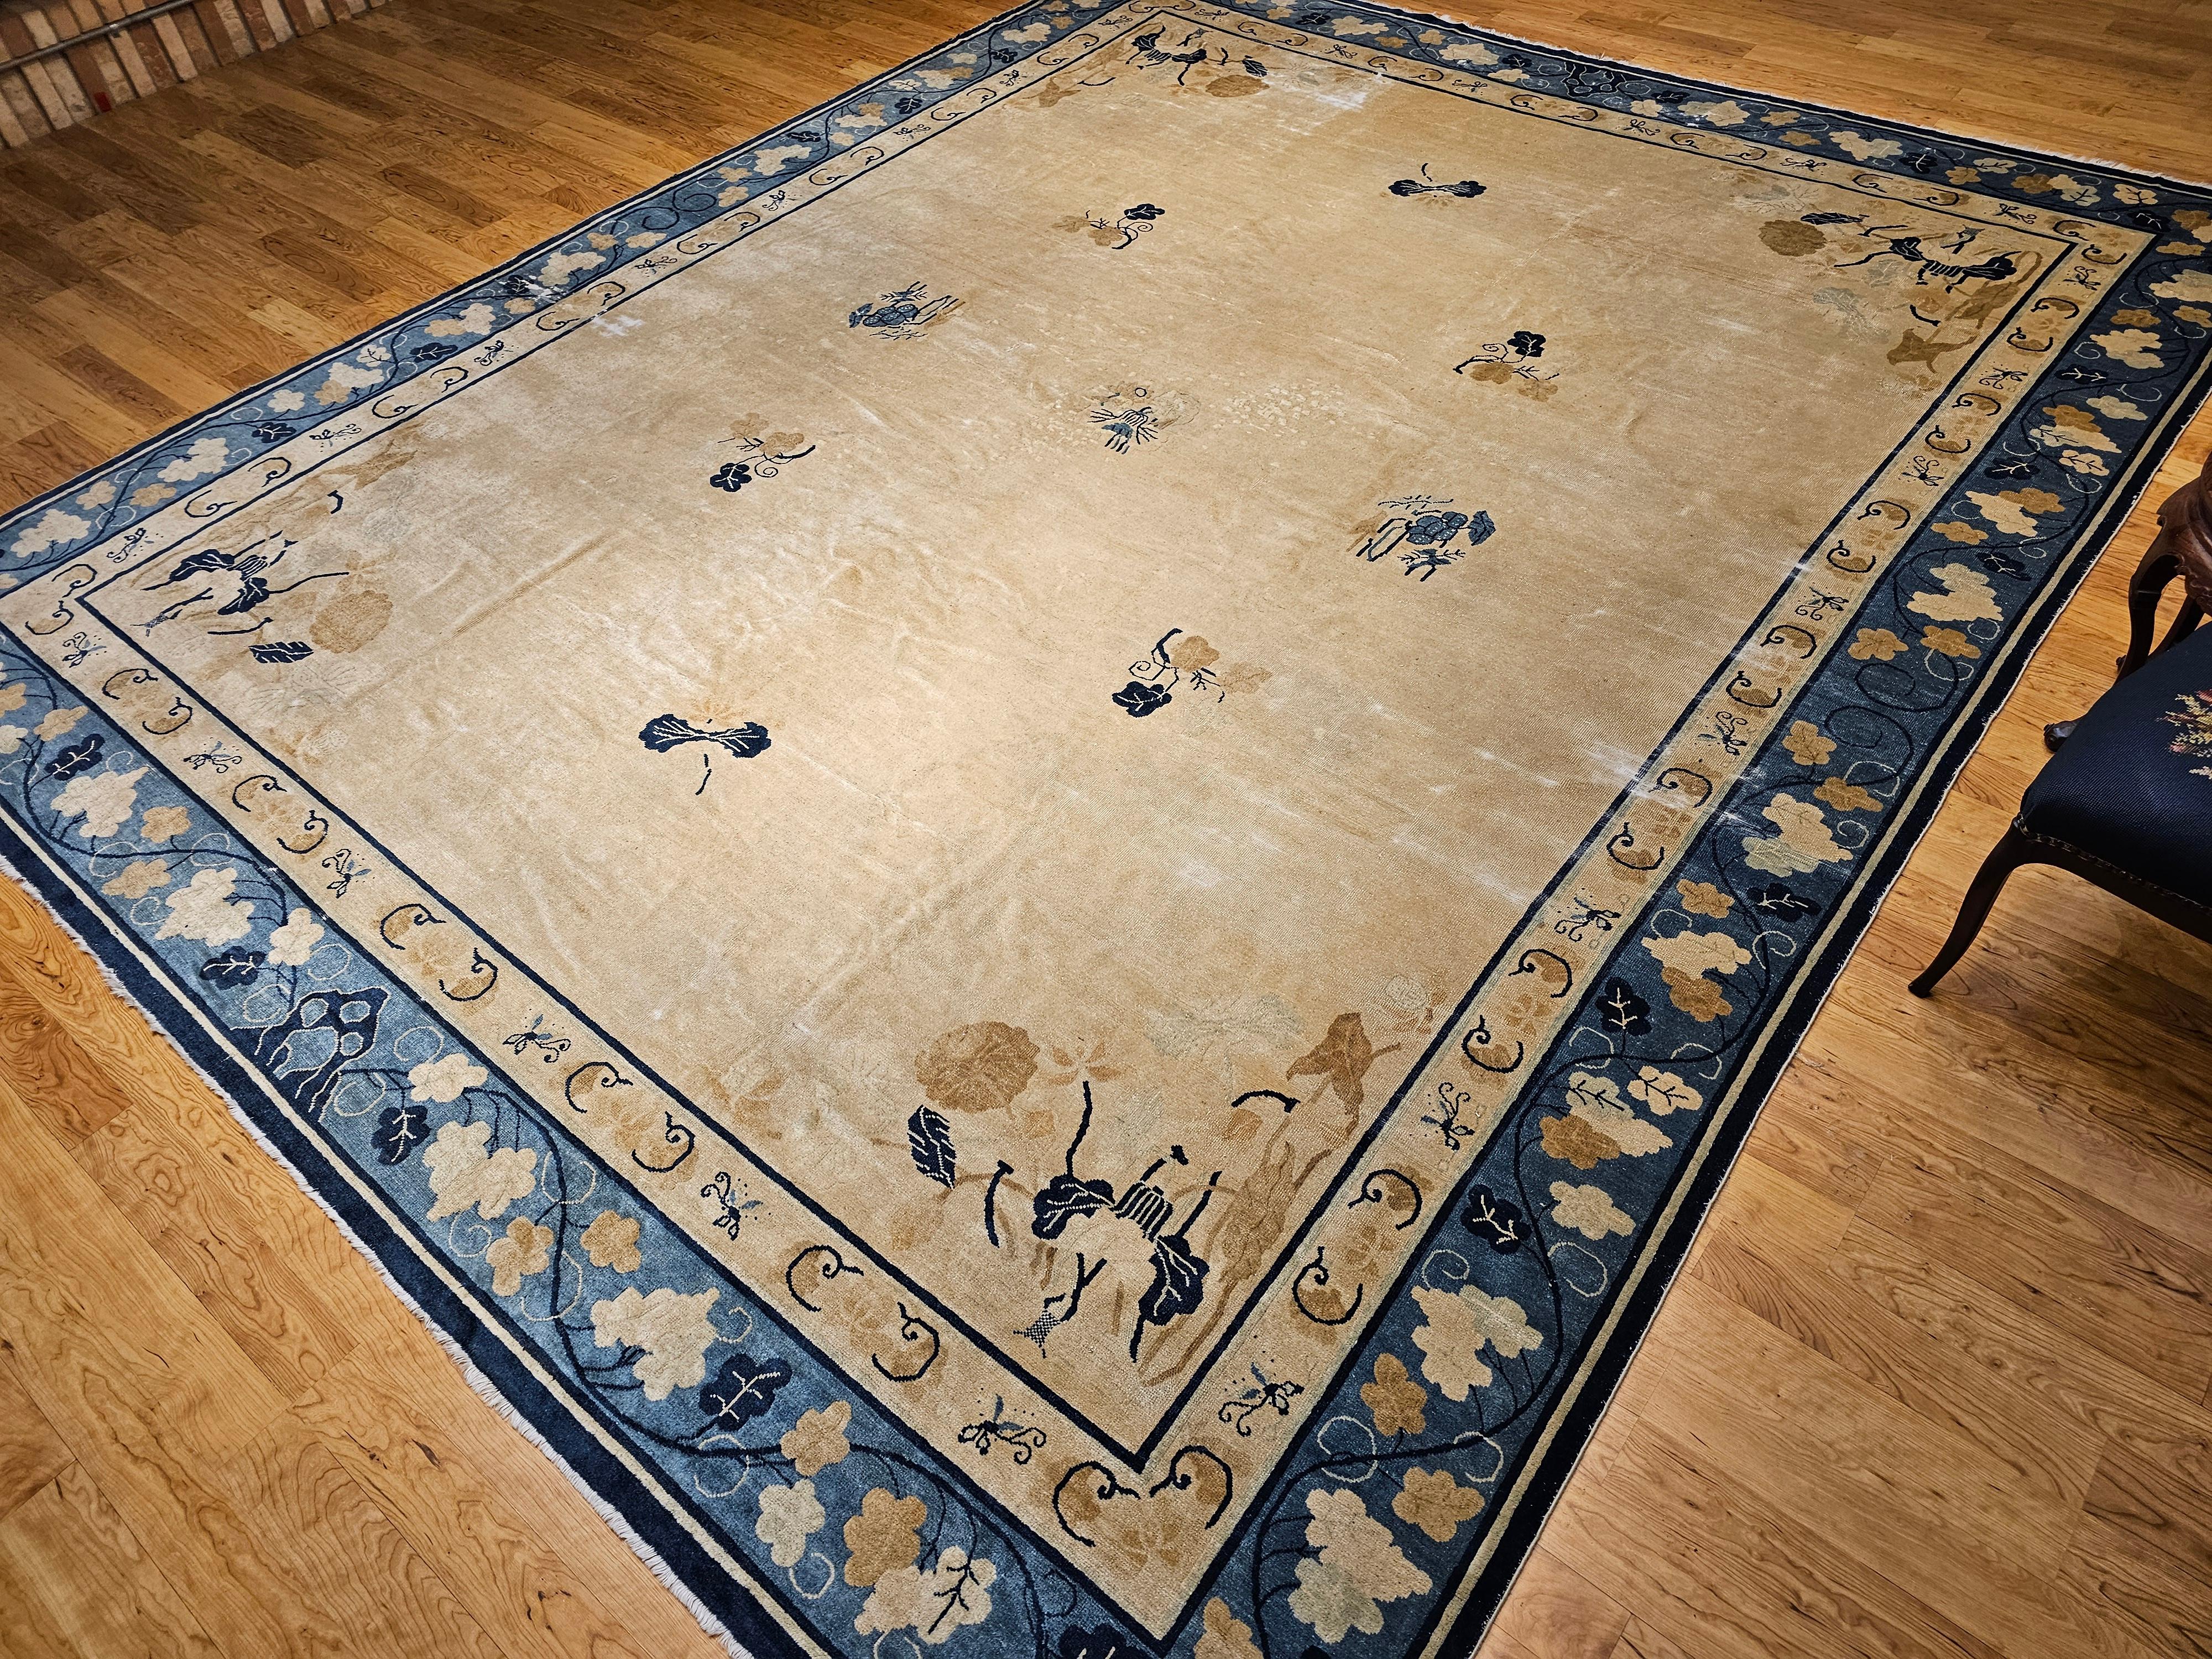 19th Century Oversized Chinese Peking Rug in Wheat, Navy, Brown, Green, Sky-Blue For Sale 7